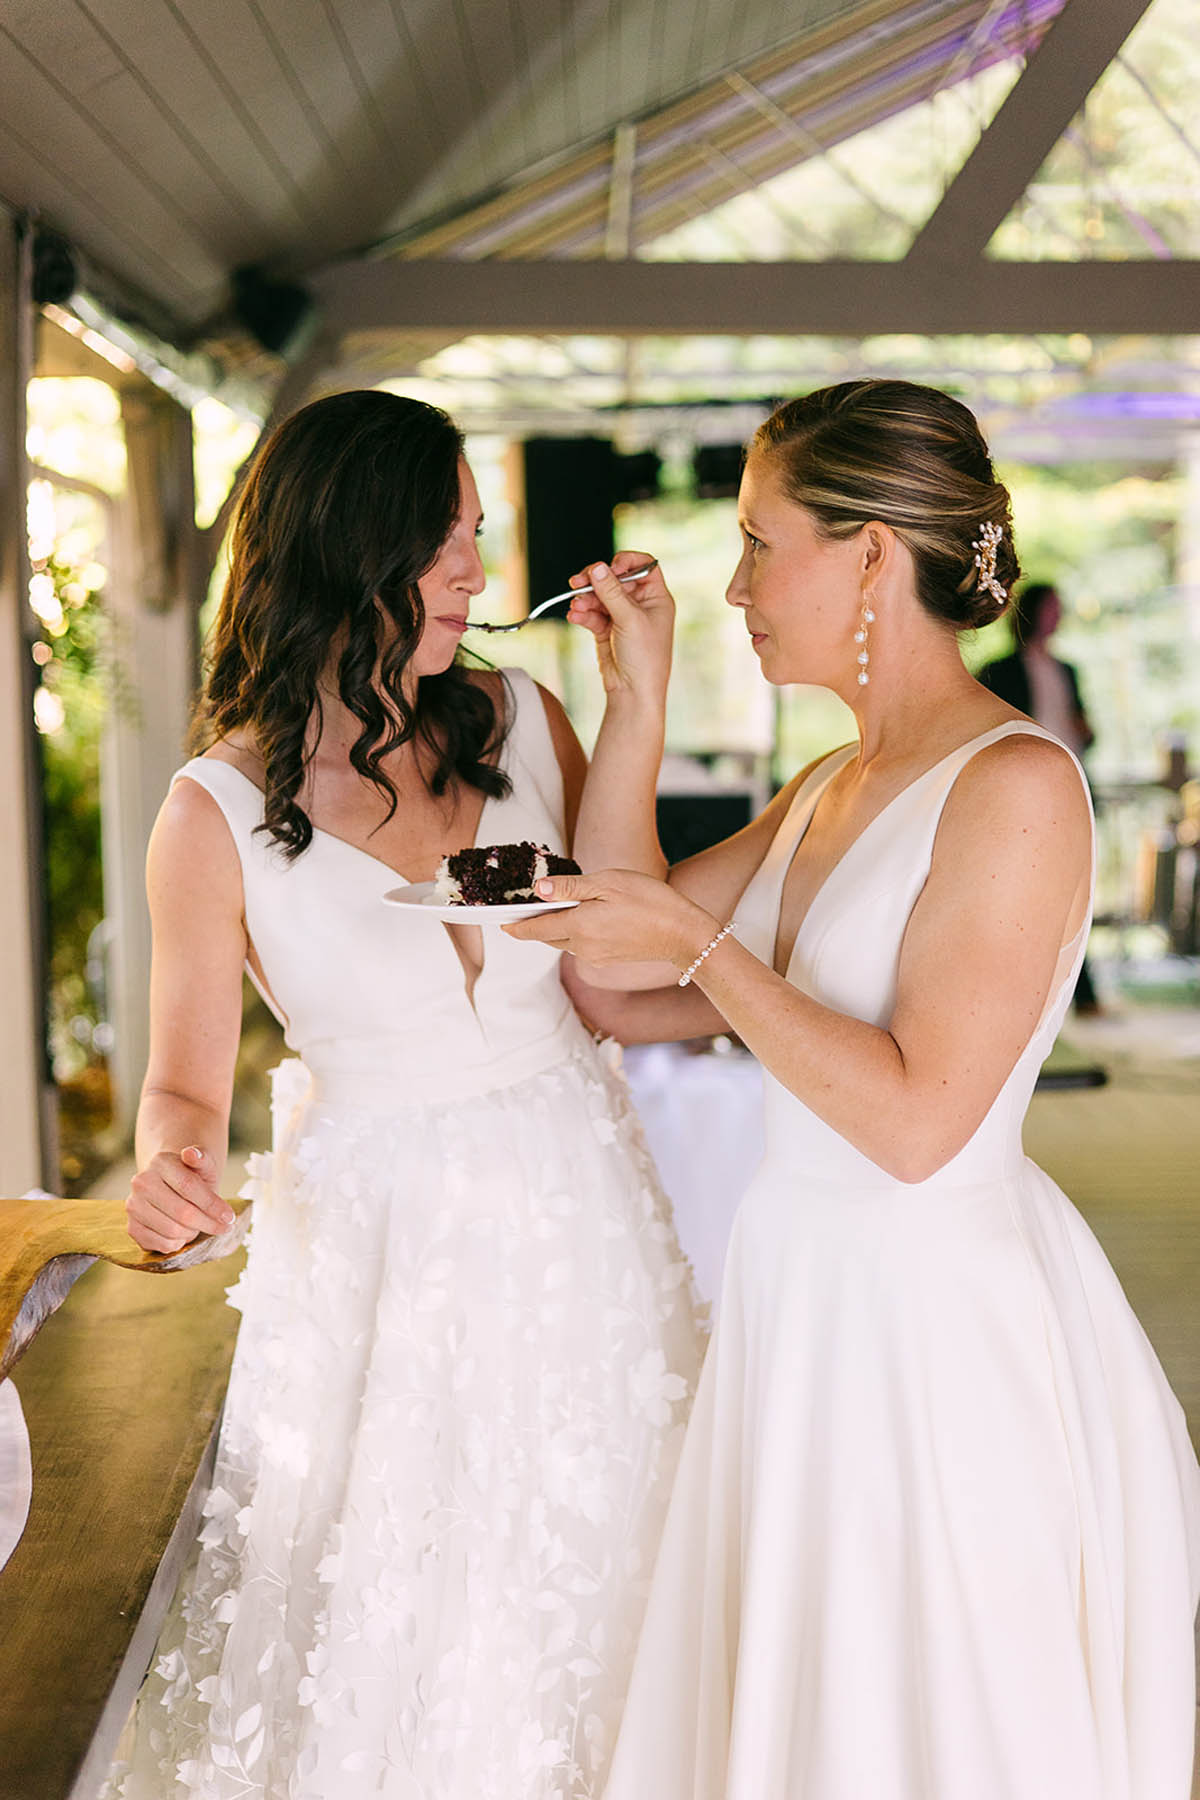 A blonde bride feeds a bite of wedding cake to her new wife. 